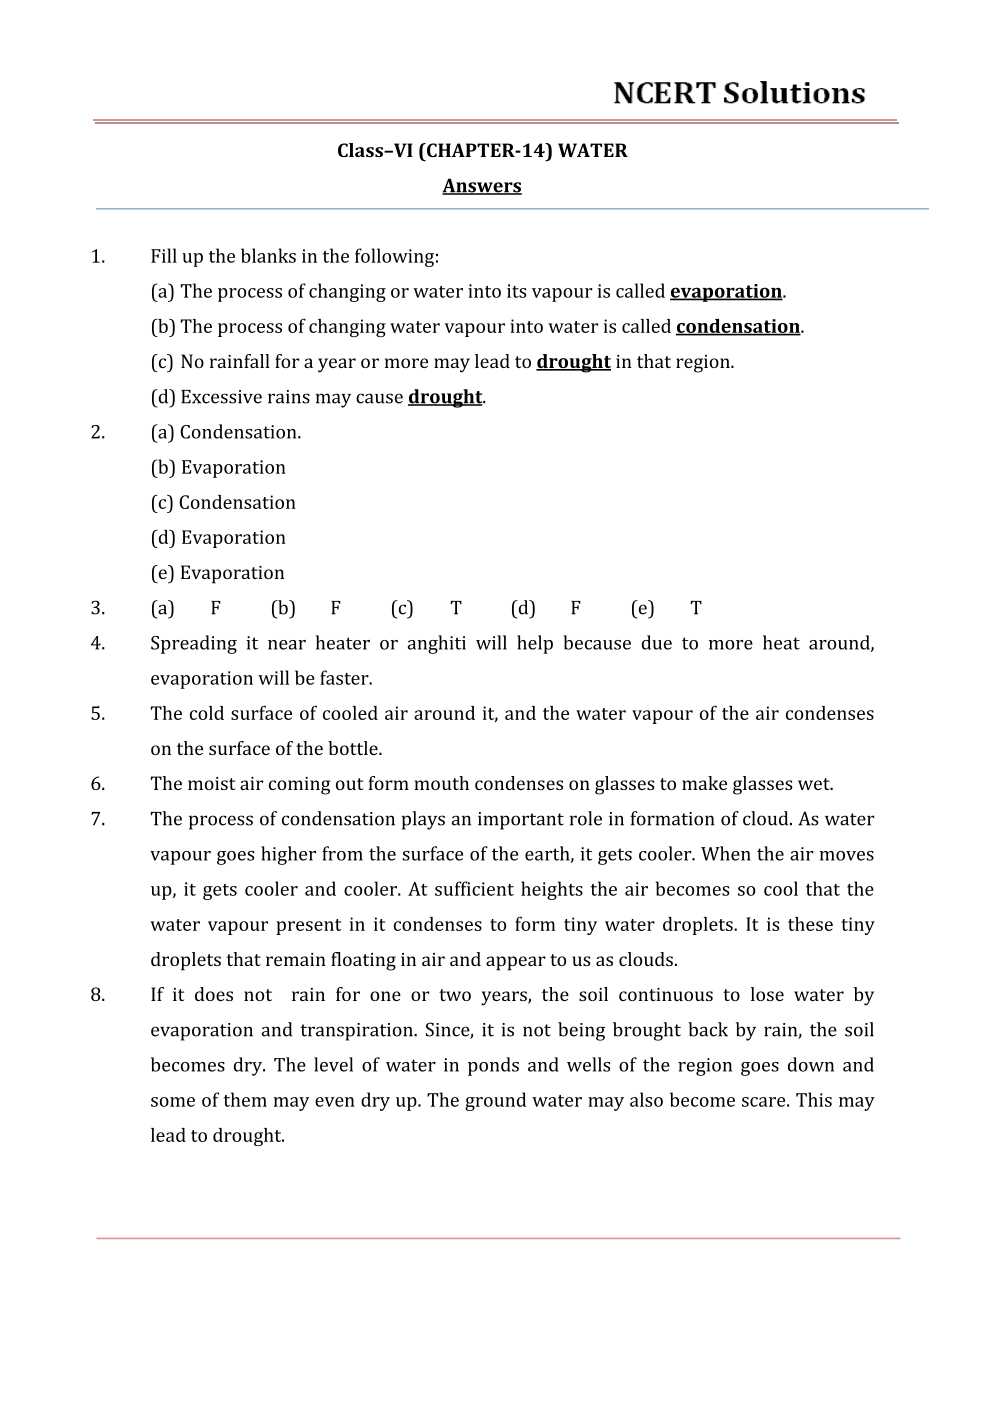 NCERT Solutions For Class 6 Science Chapter 14